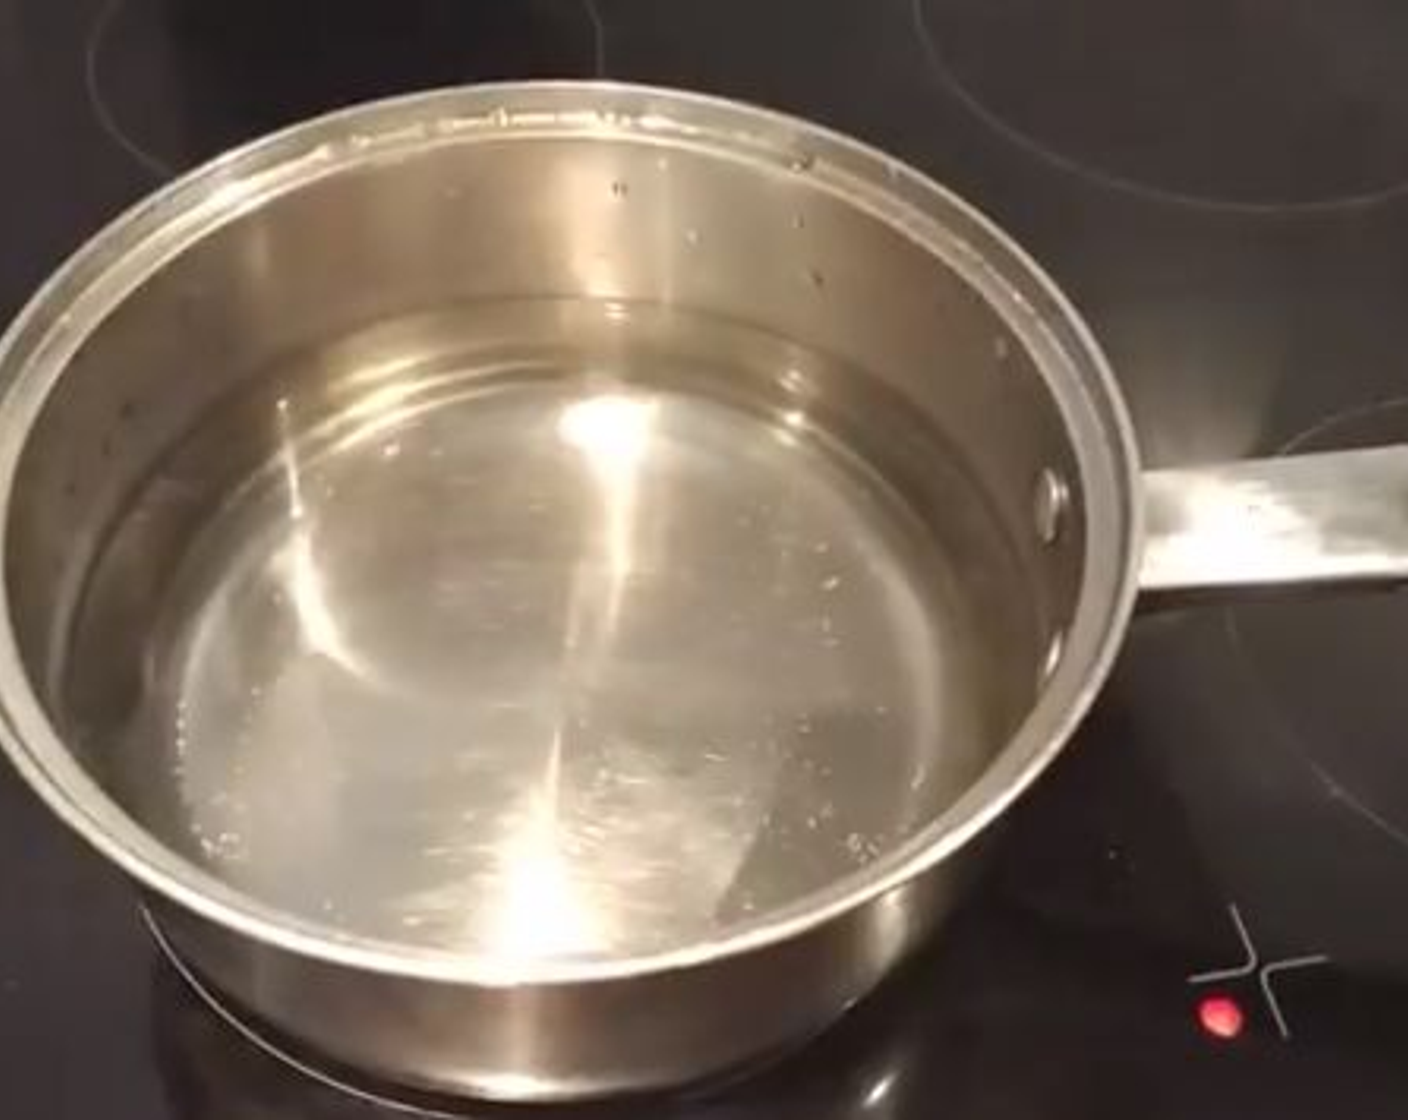 step 1 Boil water with some Salt (to taste). Once boiling, add the Egg (1) and boil for 10 minutes.